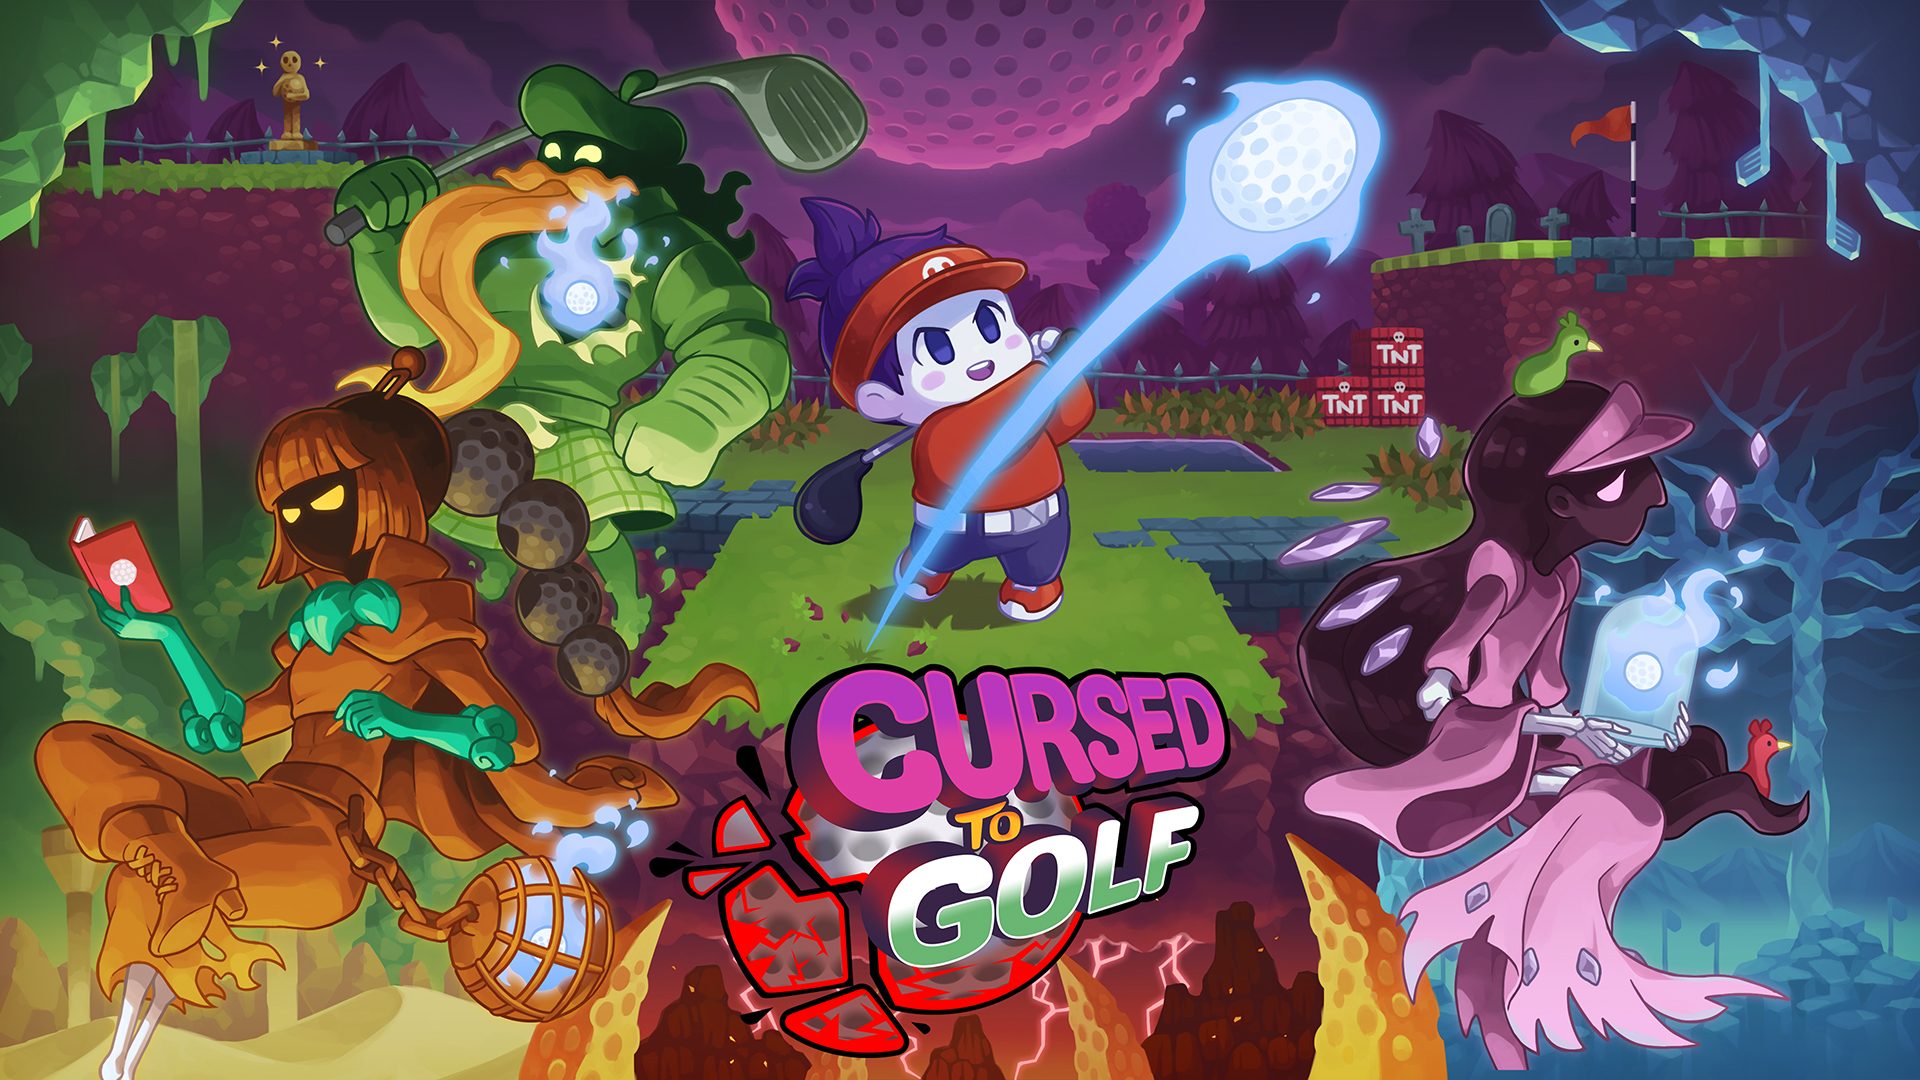 Cursed to Golf is out today on PS5 and PS4 – PlayStation.Blog